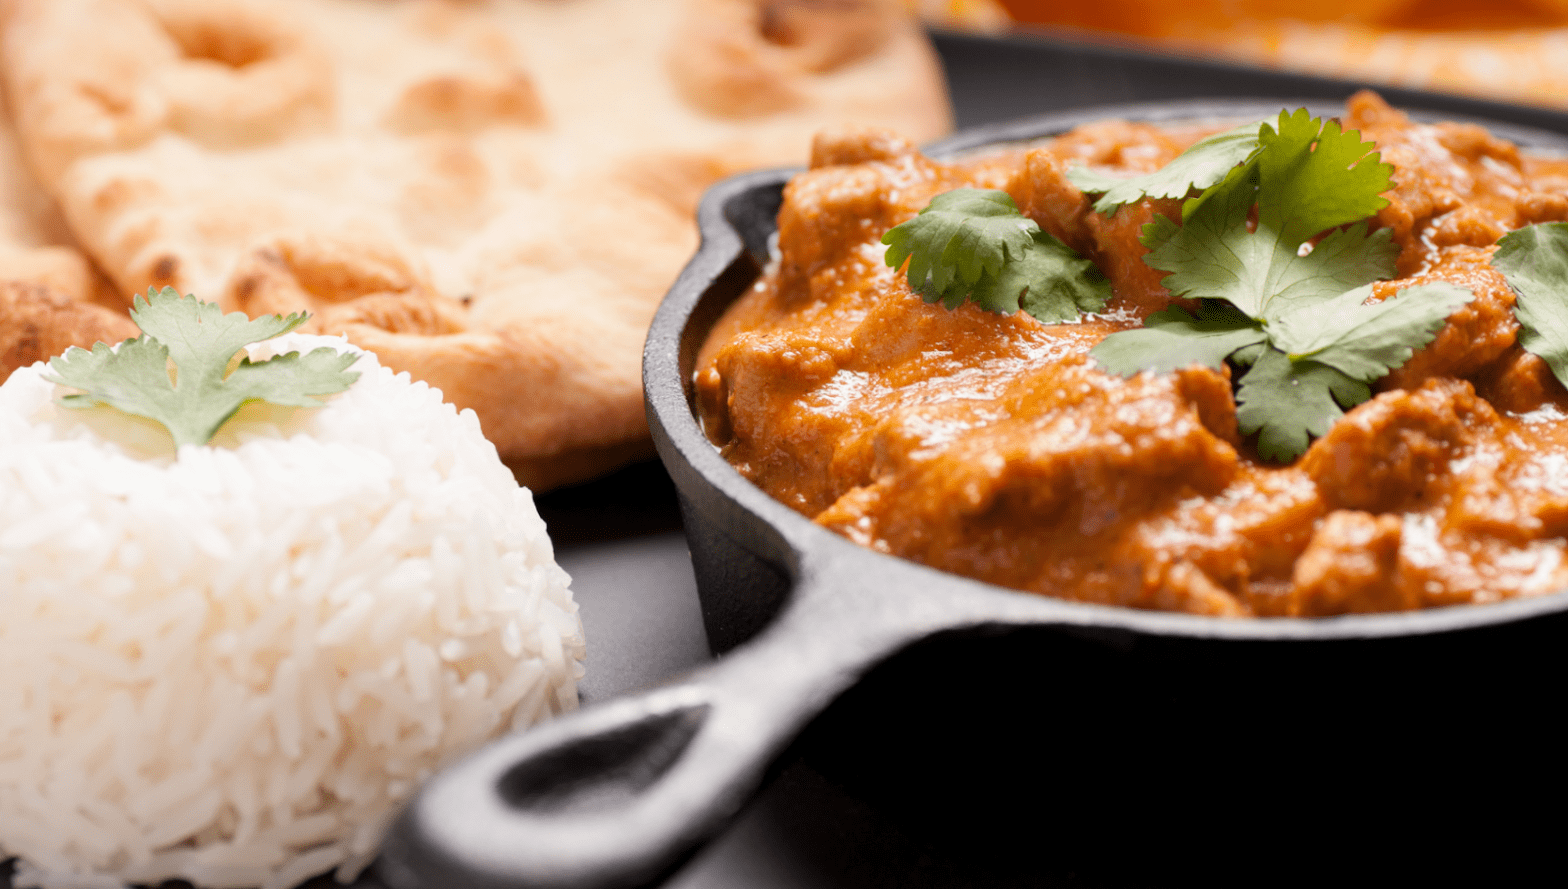 cook-chill for extended life things like curries and other ready meals